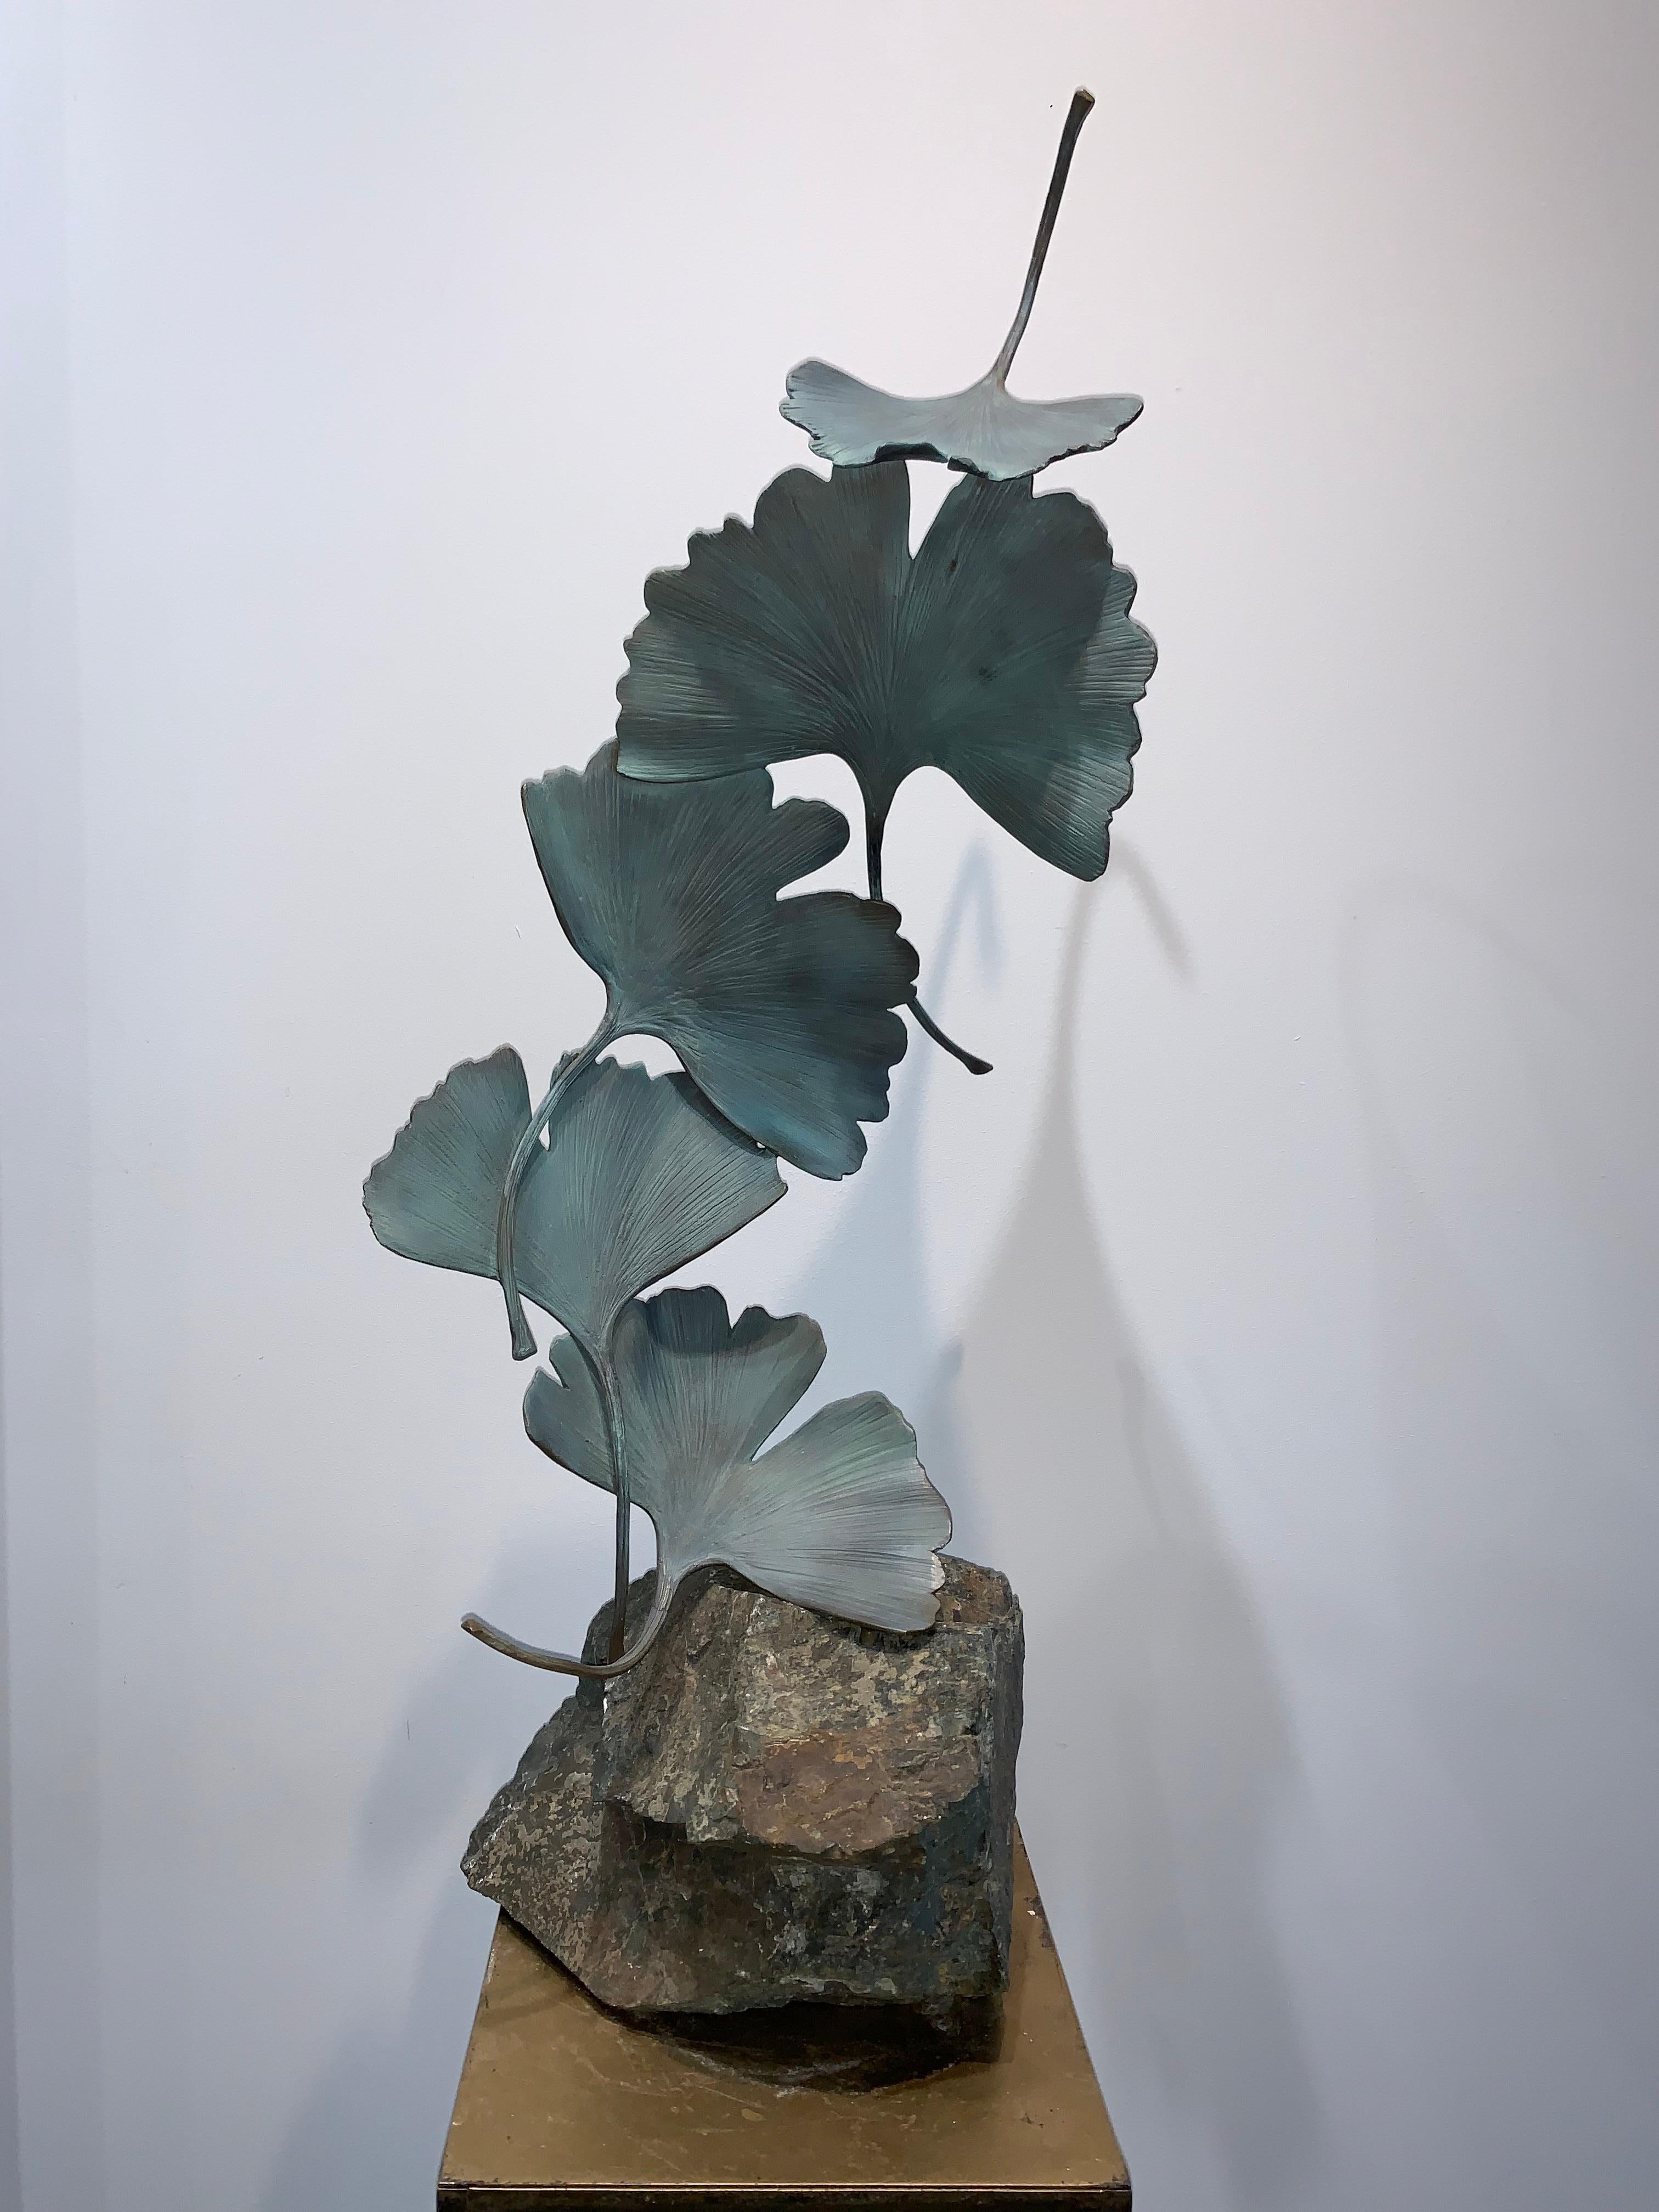 
Artist: Kuno Vollet

Title: Brass Gingko with 5 leaves art sculpture

Materials: Bronze, black granite base
Polished bronze to gold adds highlights to the leaves.
Art Deco
Mid-century modern
Contemporary sculpture

Size: 60 x 9 x 9